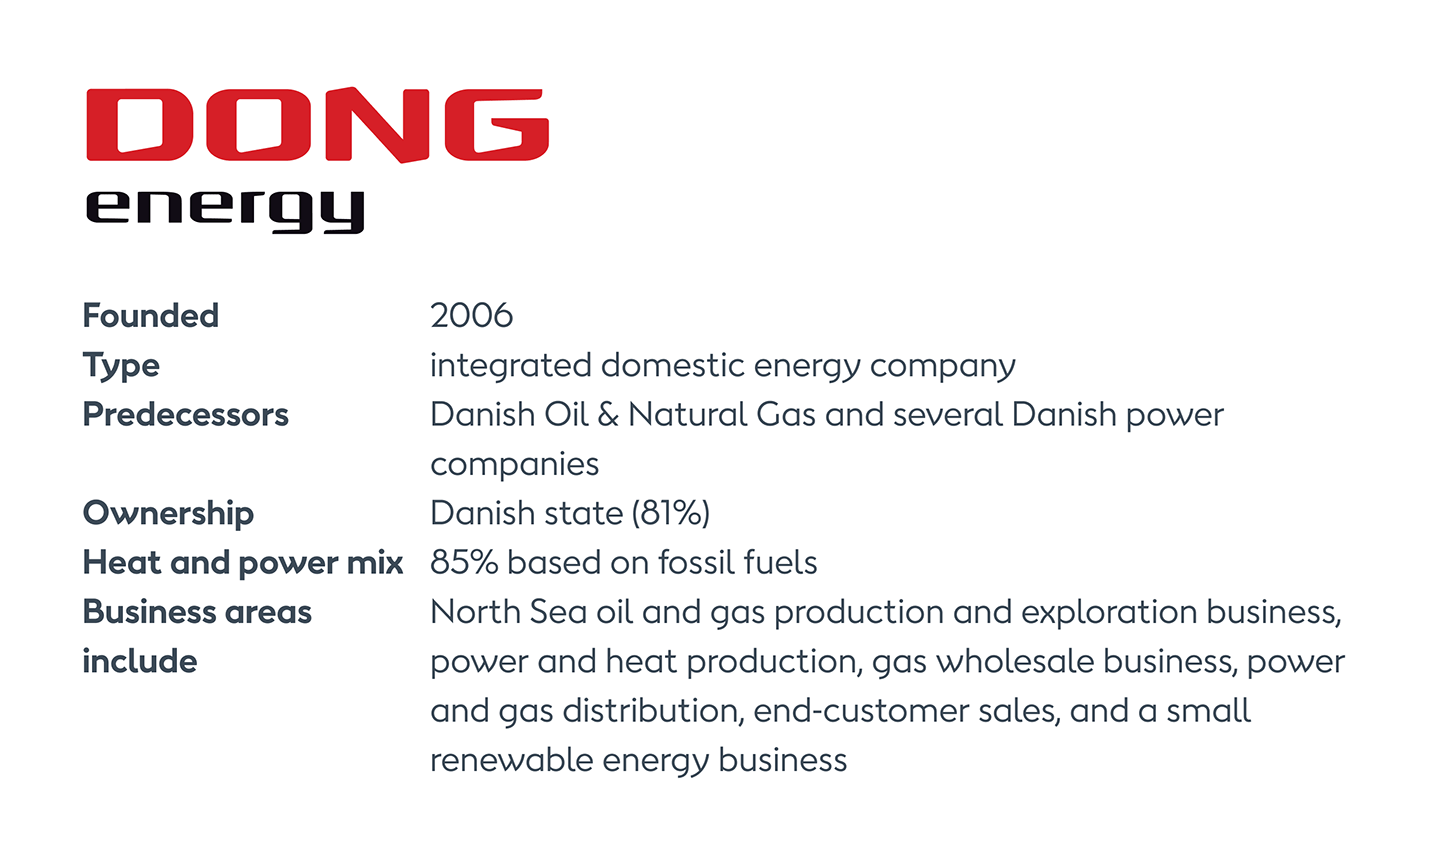 A slide offering facts about Ørsted's founding as DONG energy, including its industry, power mix, and business areas.